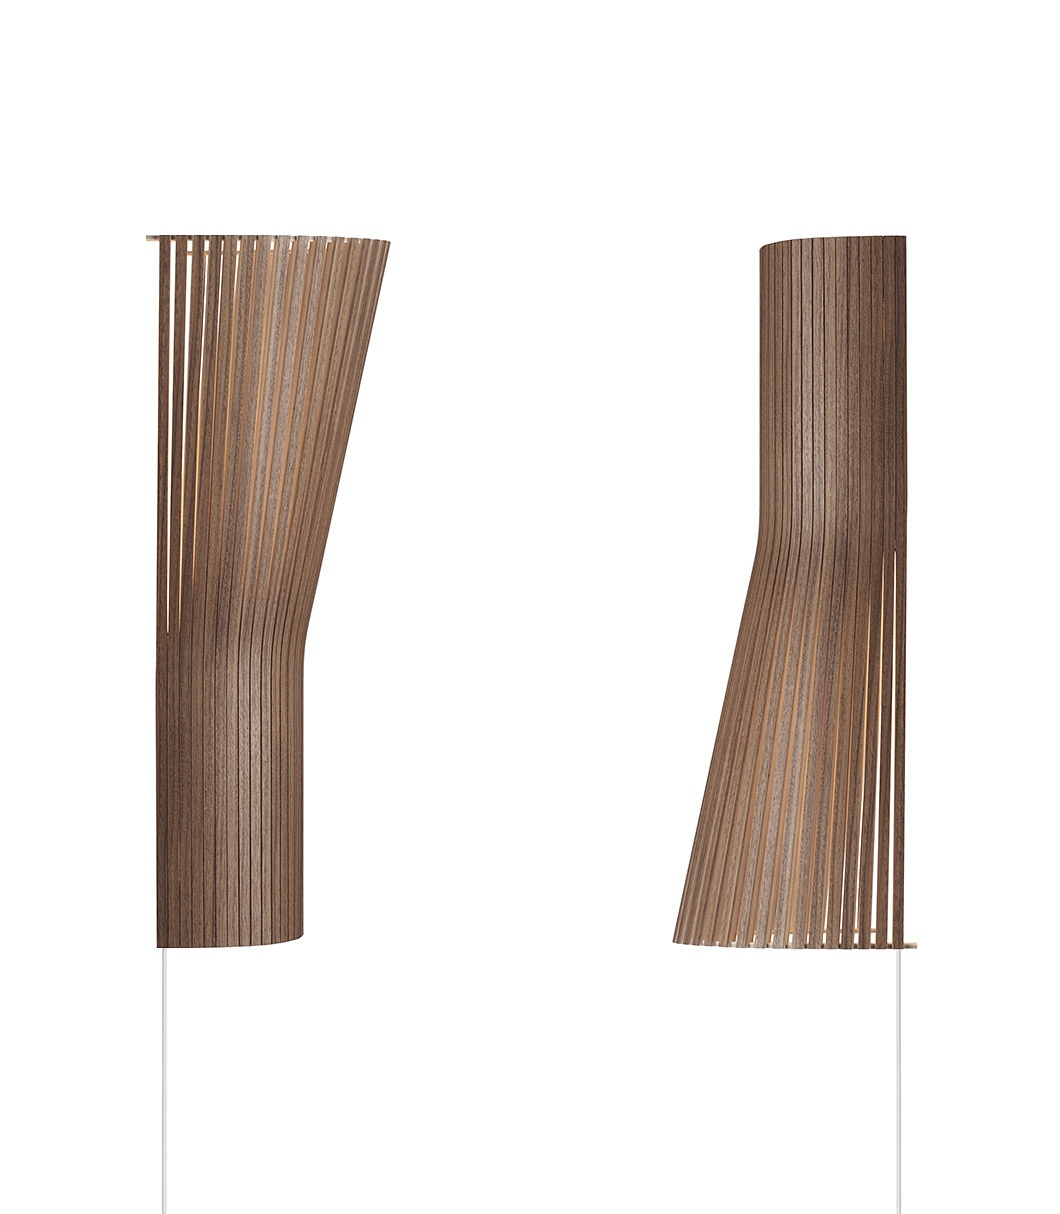 Secto Small 4231 wall lamp is available in walnut veneer